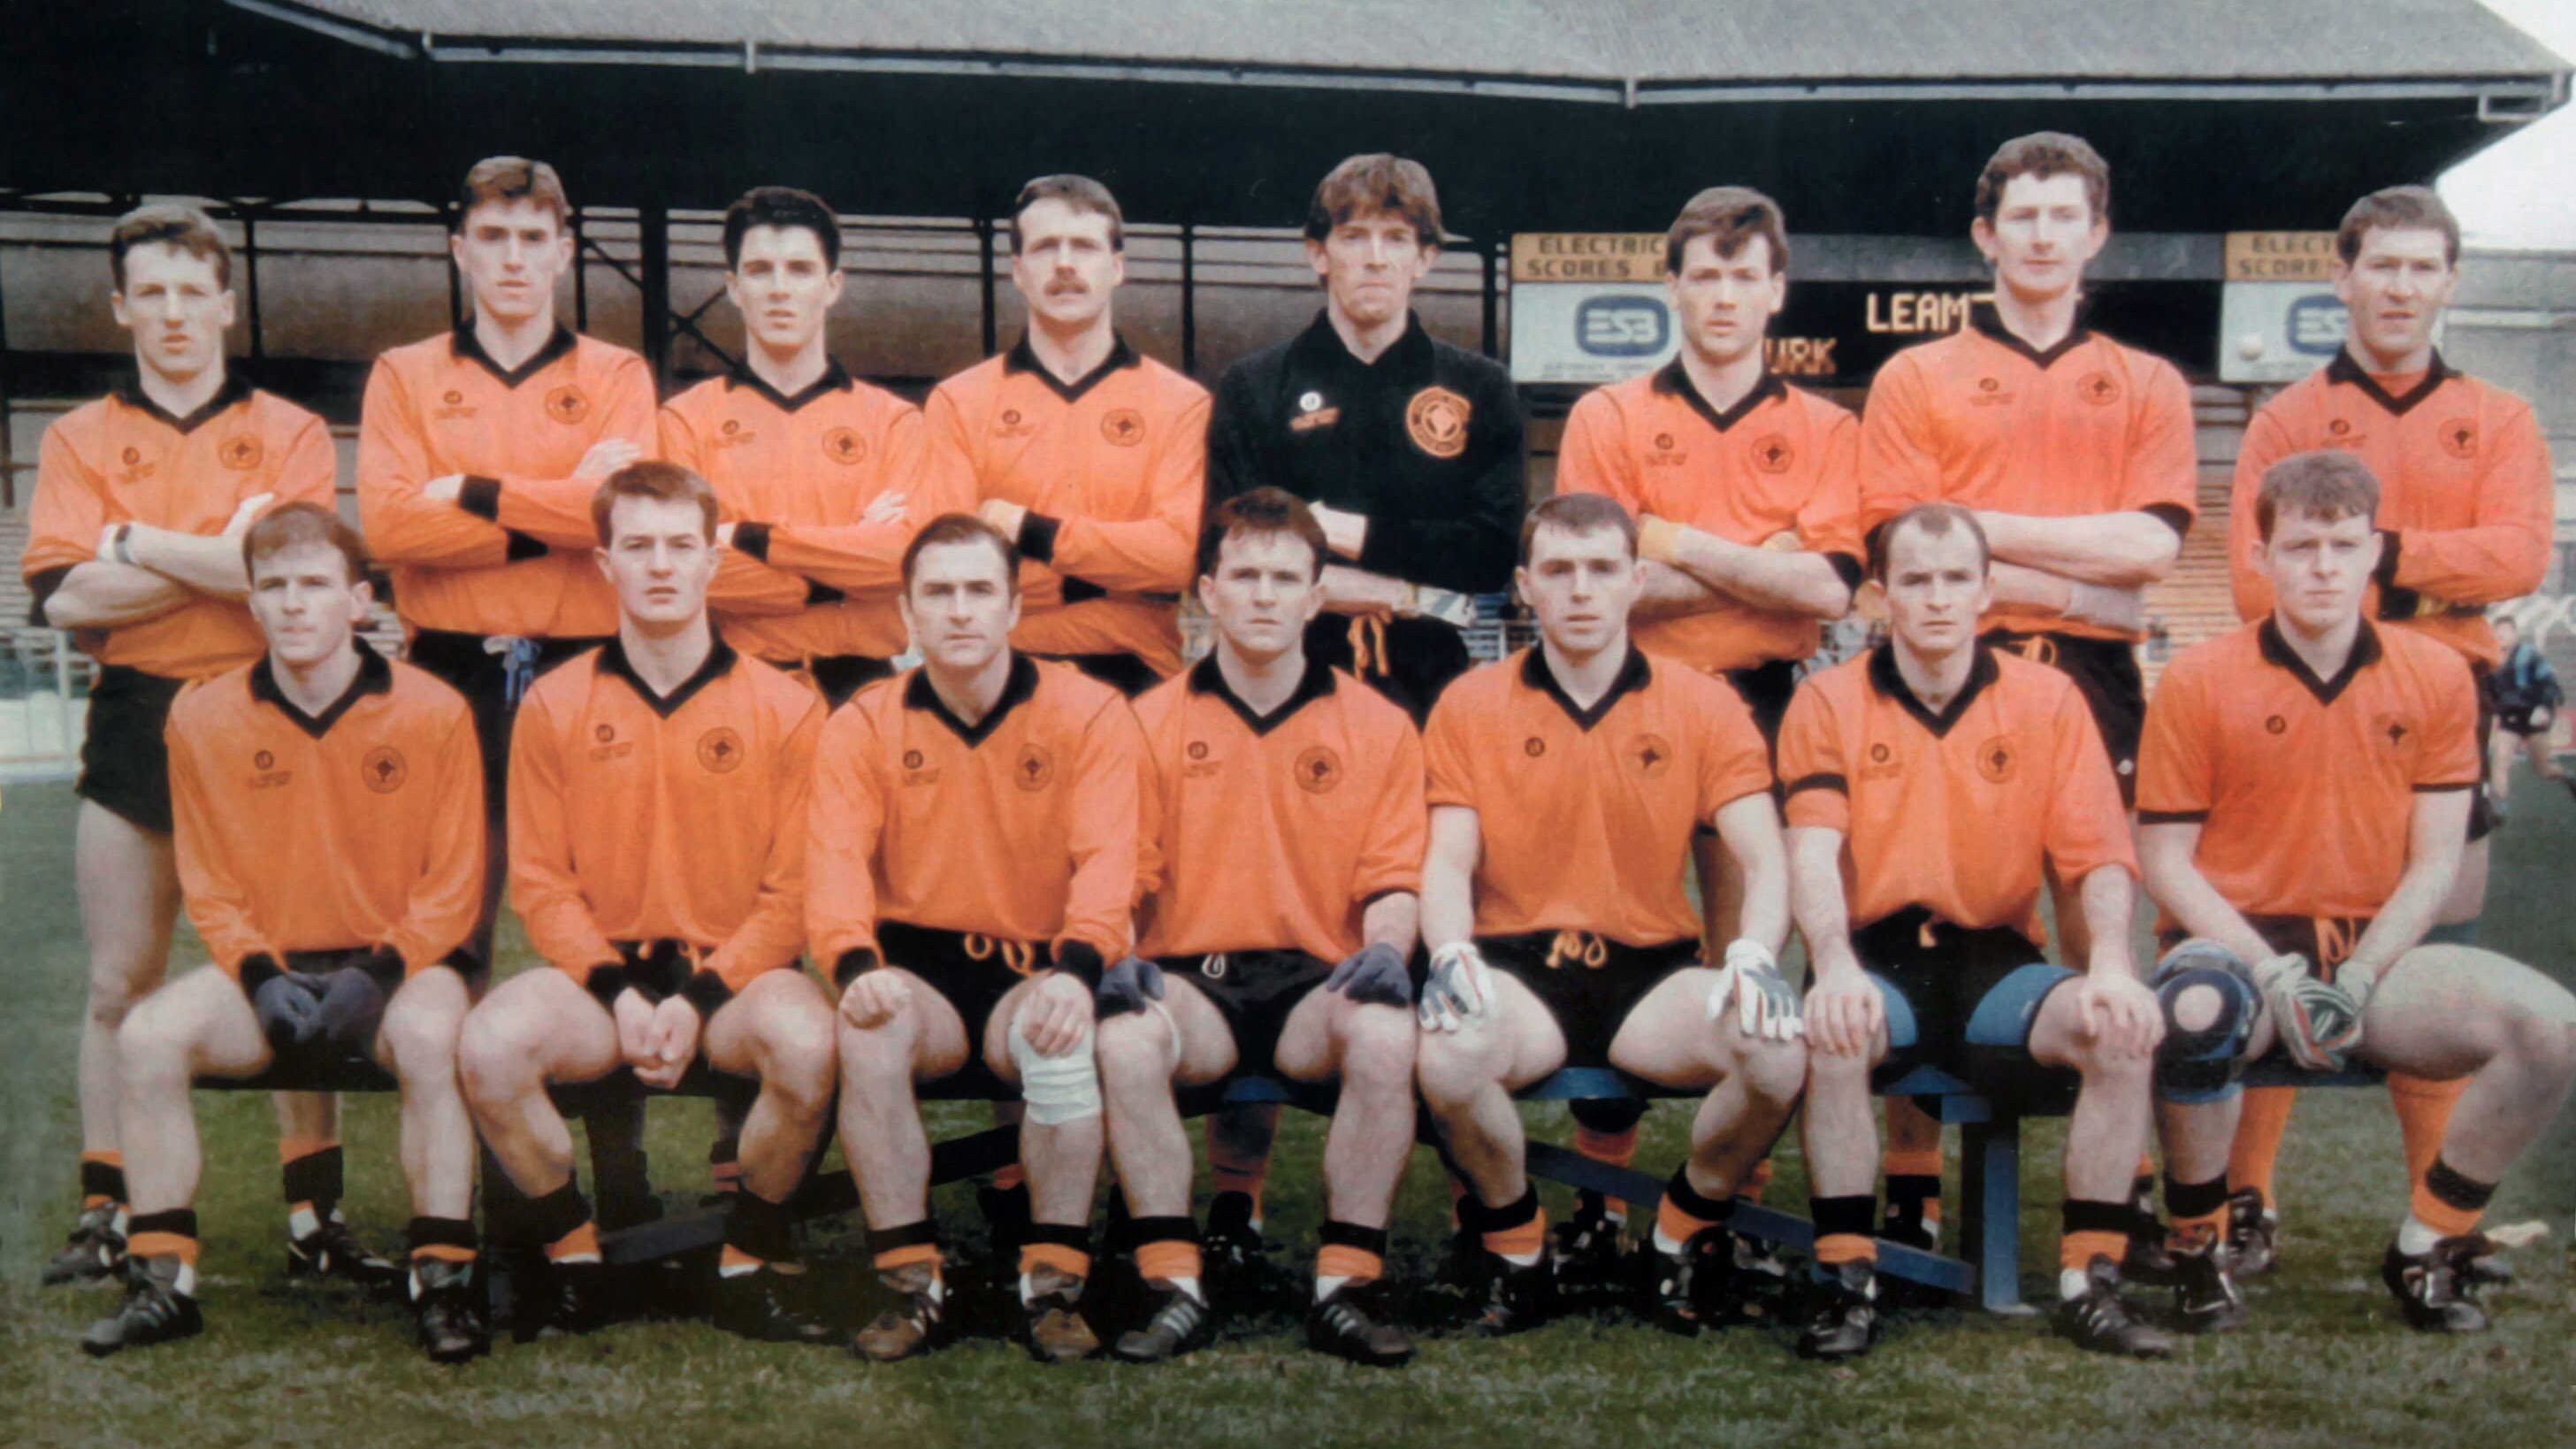 The Lavey team that lined out for the 1991 All-Ireland Club Championship final at Croke Park: (back row, l-r) Damian Doherty, Brian McCormick, Don Mulholland, Damian O'Boyle, Brendan Regan, Fergal Rafferty, James Chivers and Anthony Scullion; (front row, l-r) Ciaran McGurk, Brian Scullion, Hugh Martin McGurk, Johnny McGurk, Henry Downey, Colm McGurk and Seamus Downey